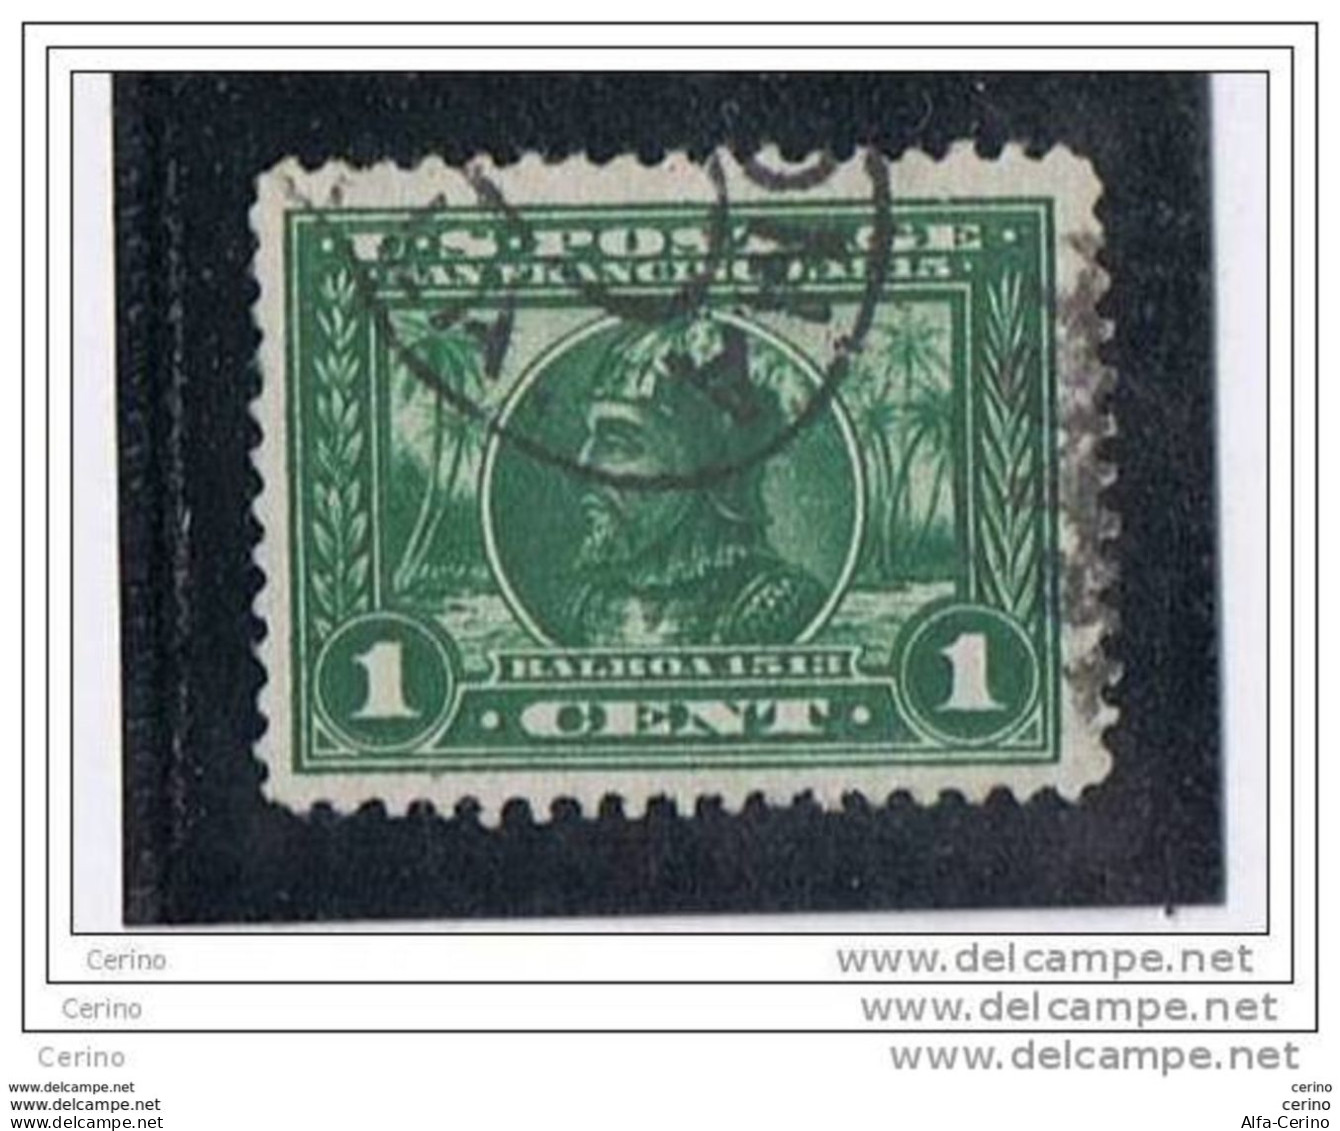 U.S.A.:  1912/15  S. FRANCISCO  EXPO  -  1 C. USED  STAMP  -  D. 12  -  YV/TELL. 195 - Used Stamps